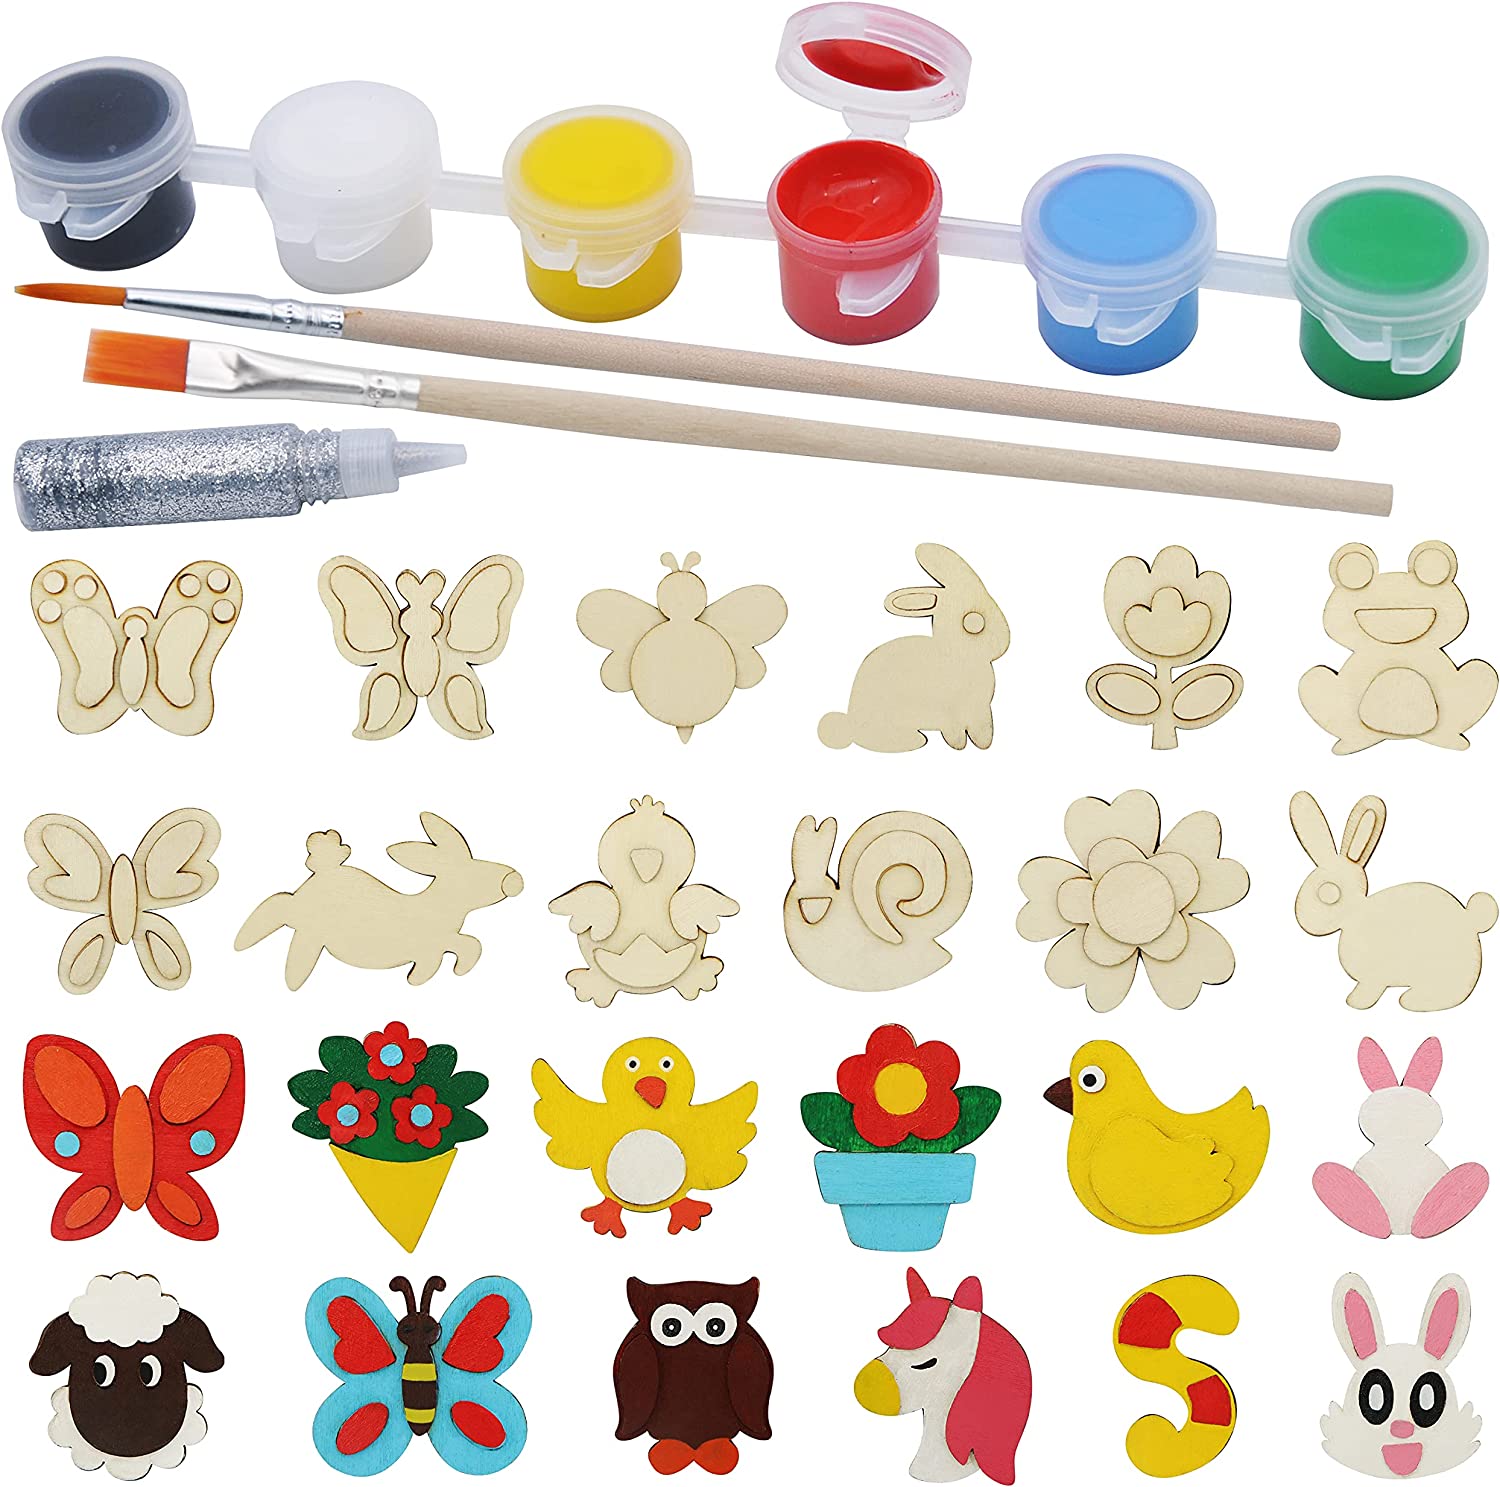 JOYIN 12 Rock Painting Kit, 43 Pcs Arts and Crafts for Kids Ages 6